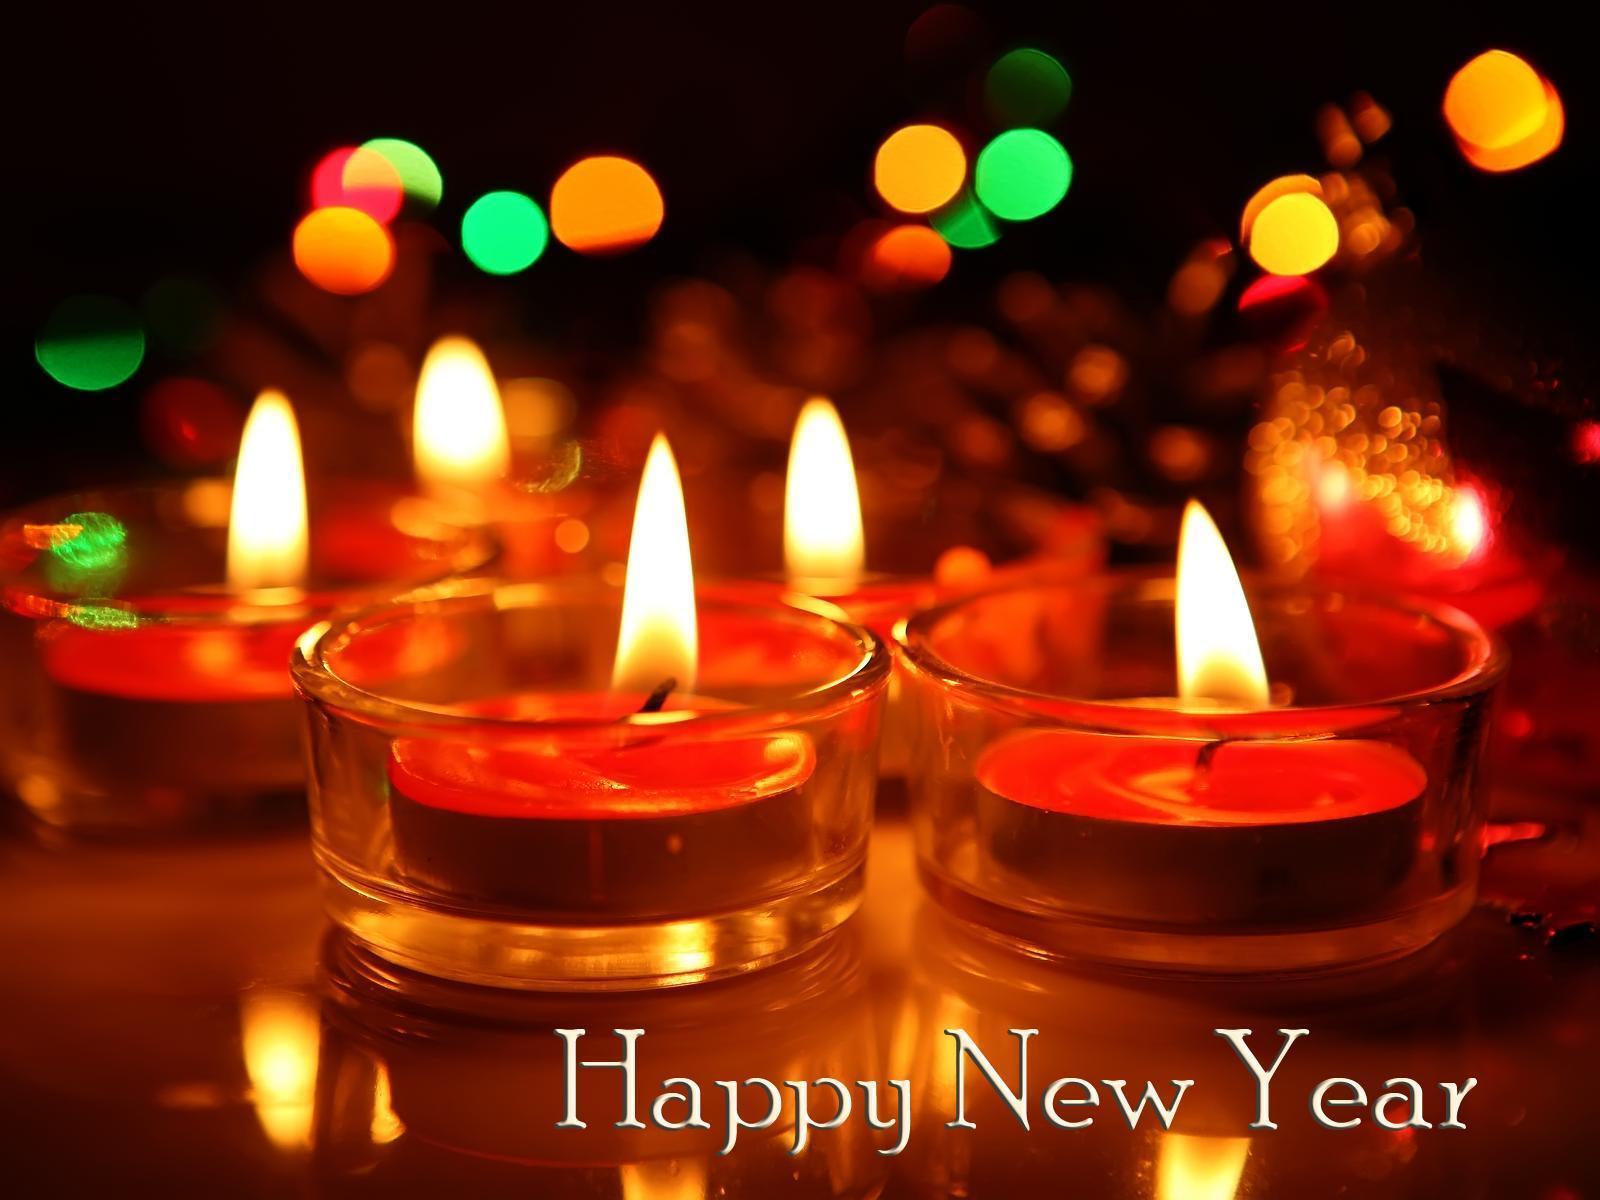 Happy New Year Wishes, Greetings, sms, wallpapers